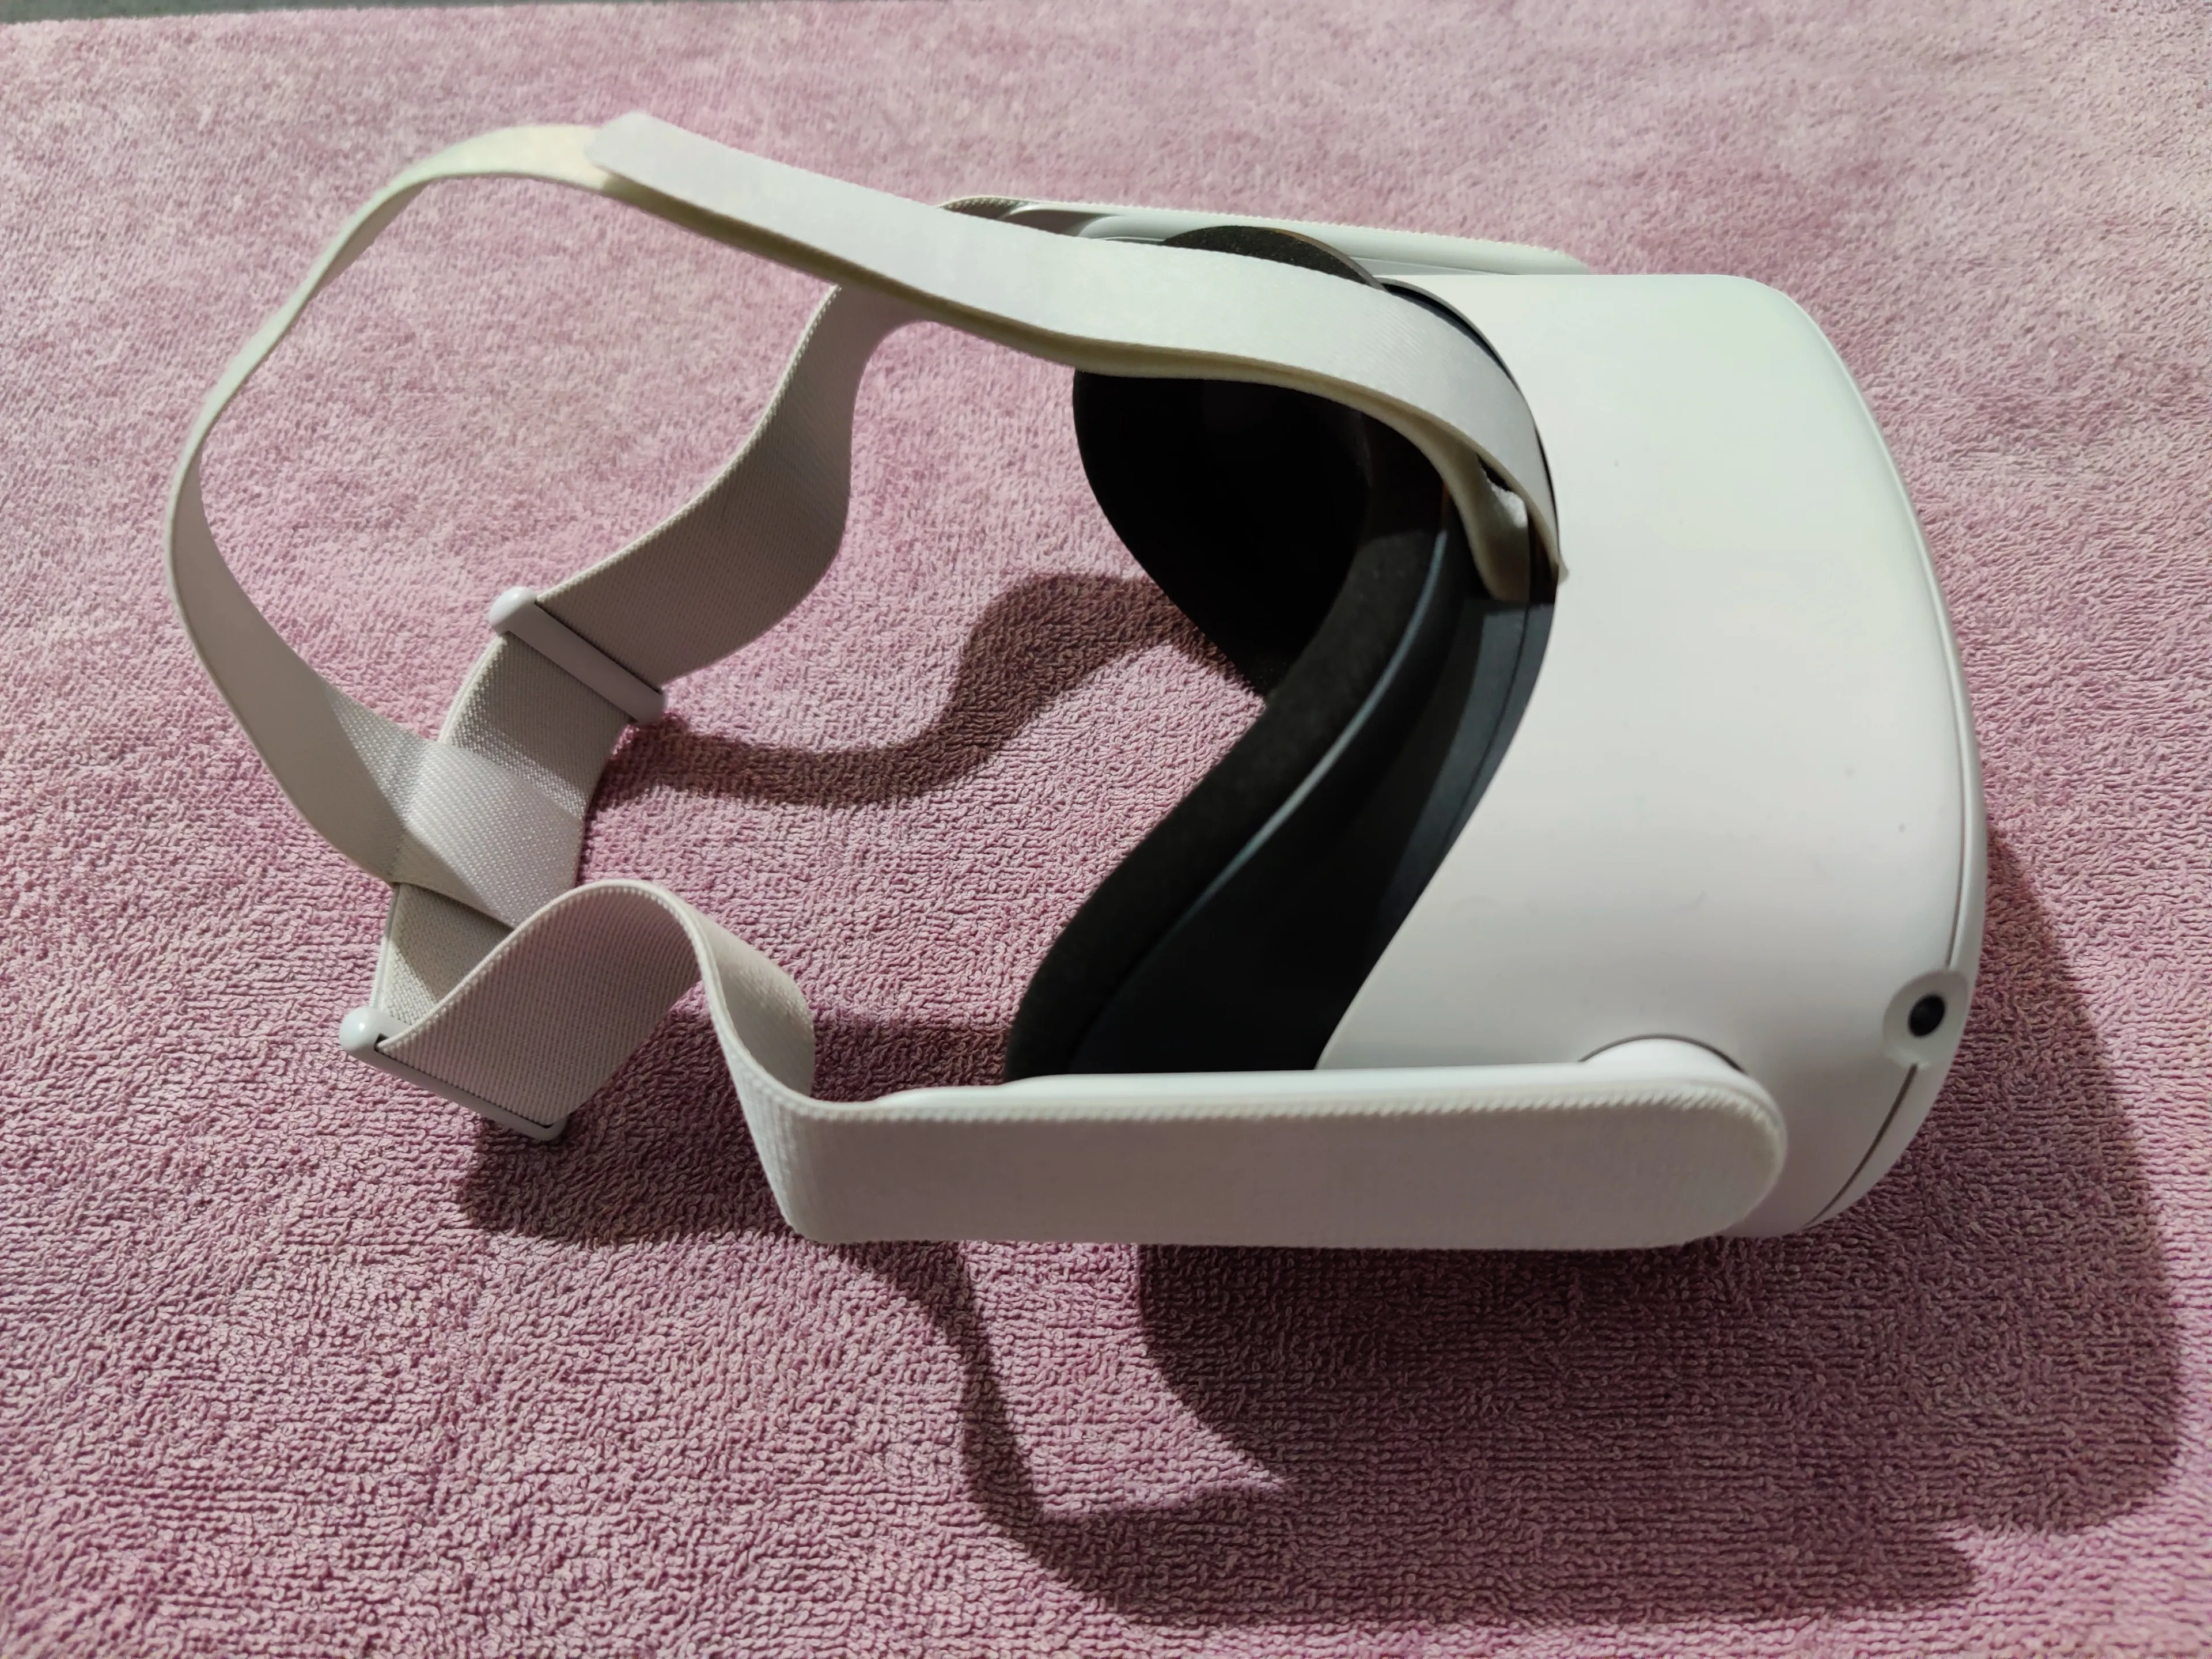 oculus quest 2 review 5f1604088072